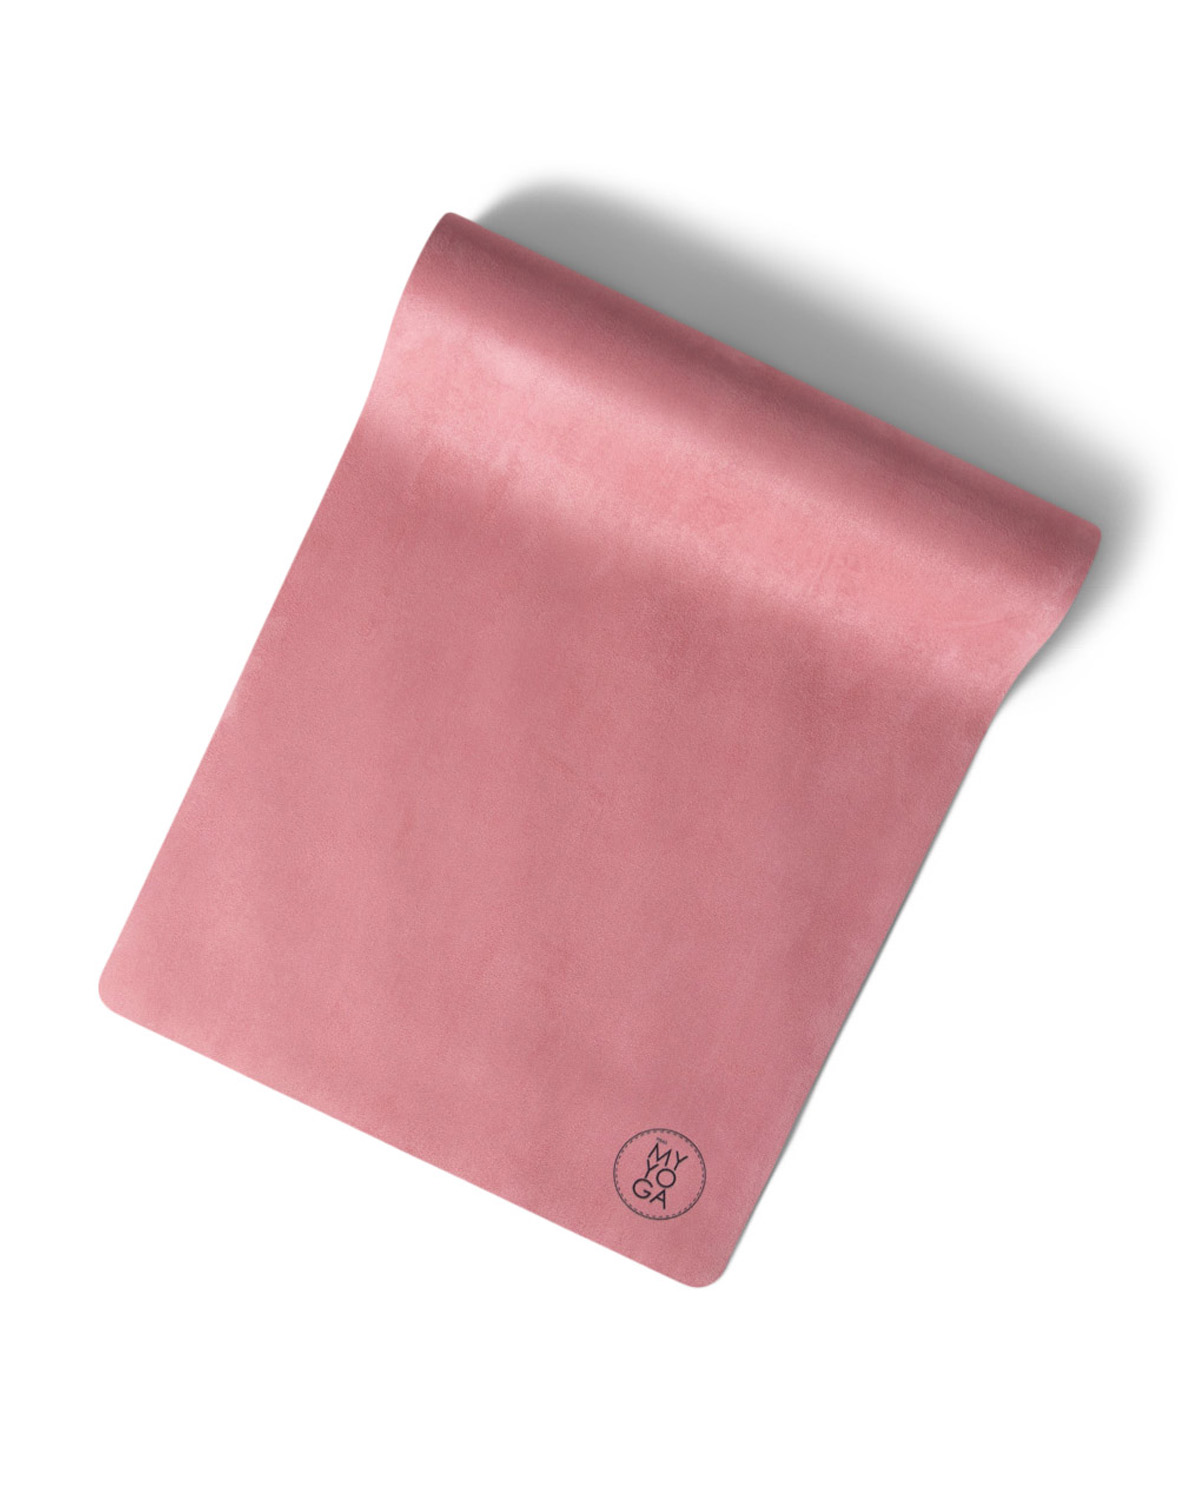 Entry Level Yoga Mat - Dusty Pink - Yoga Veda